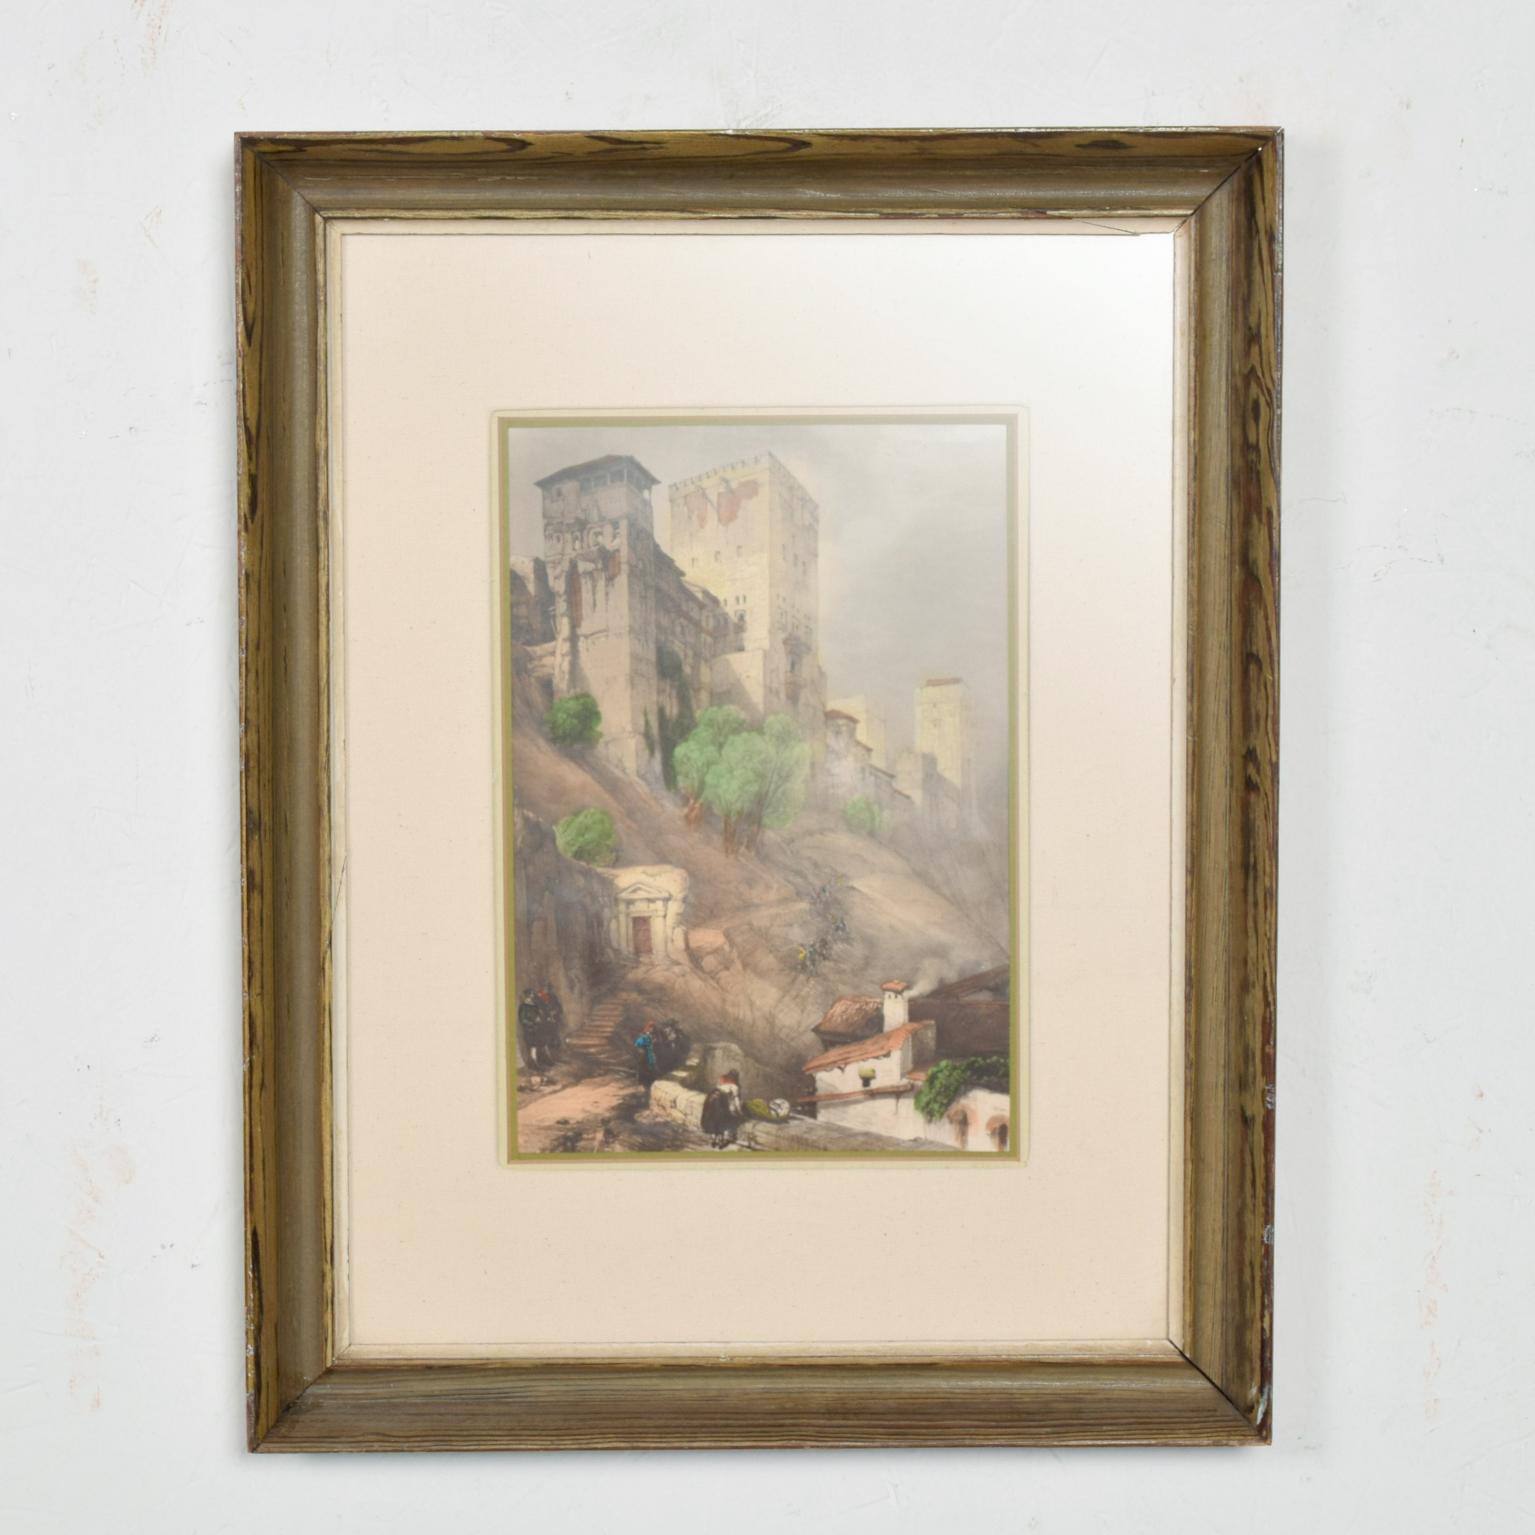 AMBIANIC presents

1960s Art Impressionism European Landscape Lithograph on Paper
Wood Frame with Non-Reflective Glass.
Unsigned.
21.25 H x 16.5 W x .5 D, Art 8.5 x 12
Original Unrestored Vintage Condition.
Please see the images.

